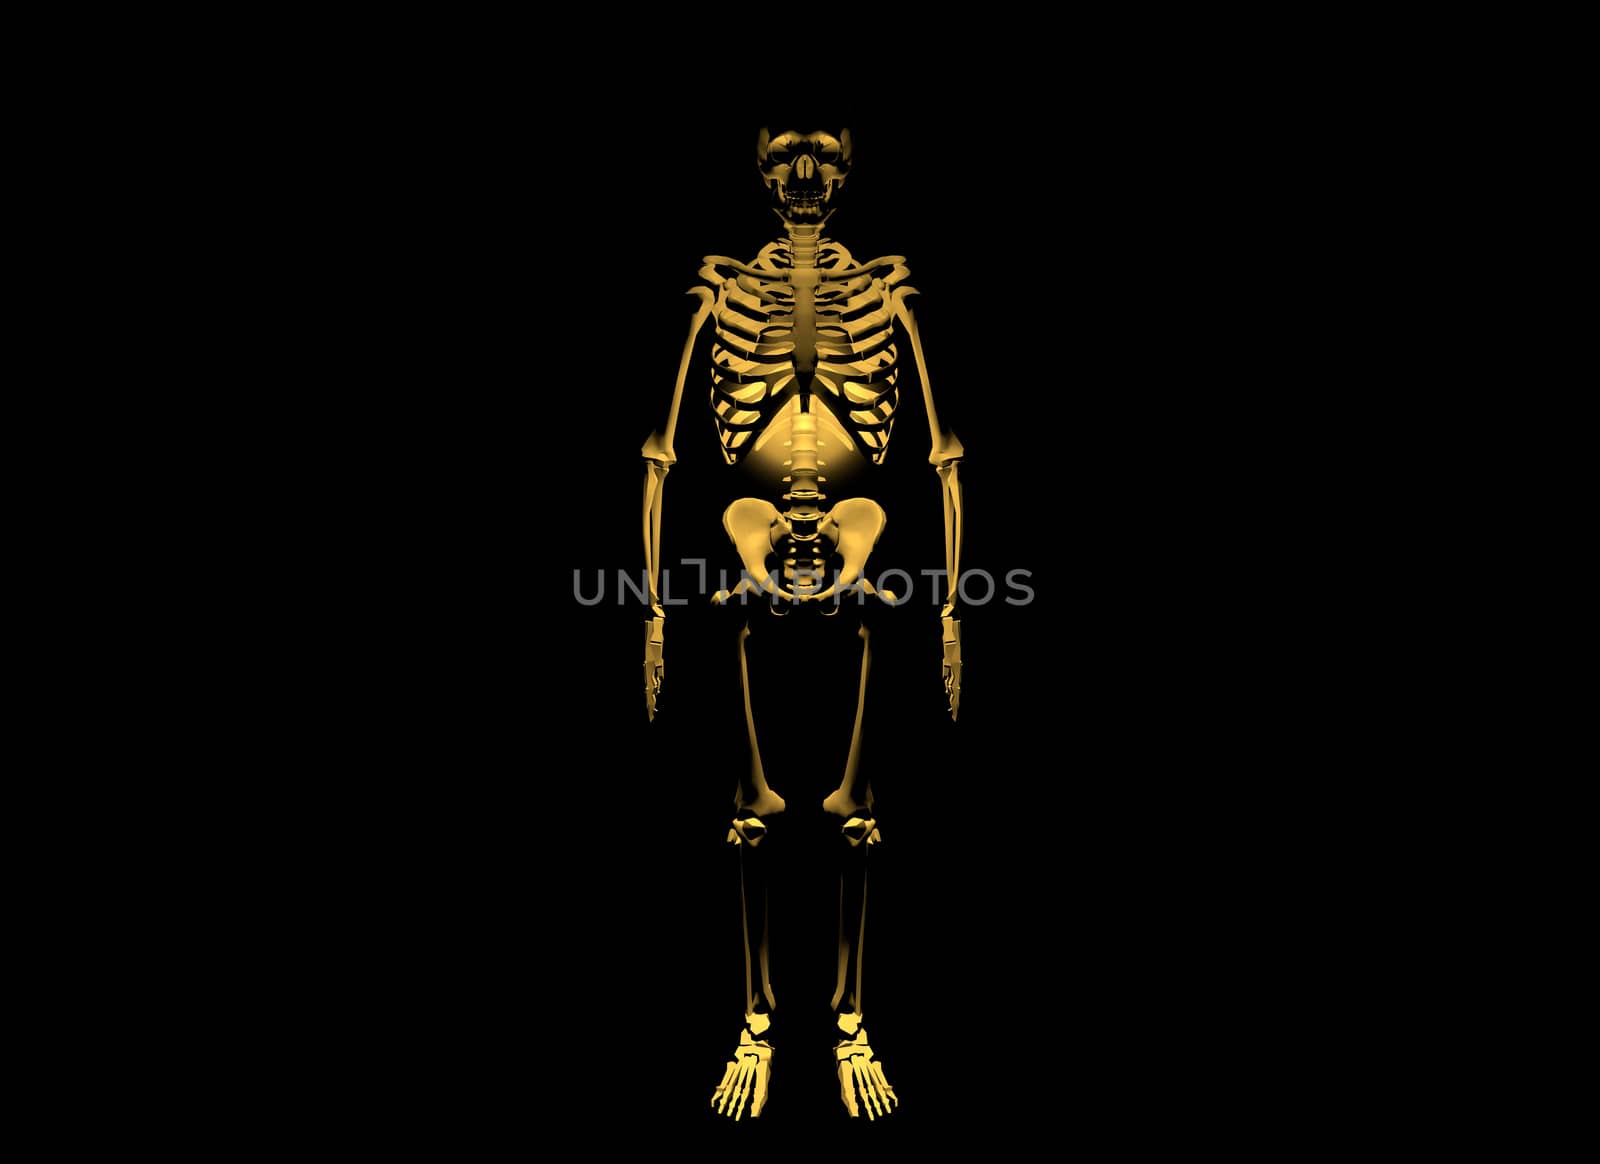 Skeleton on black background by xizang